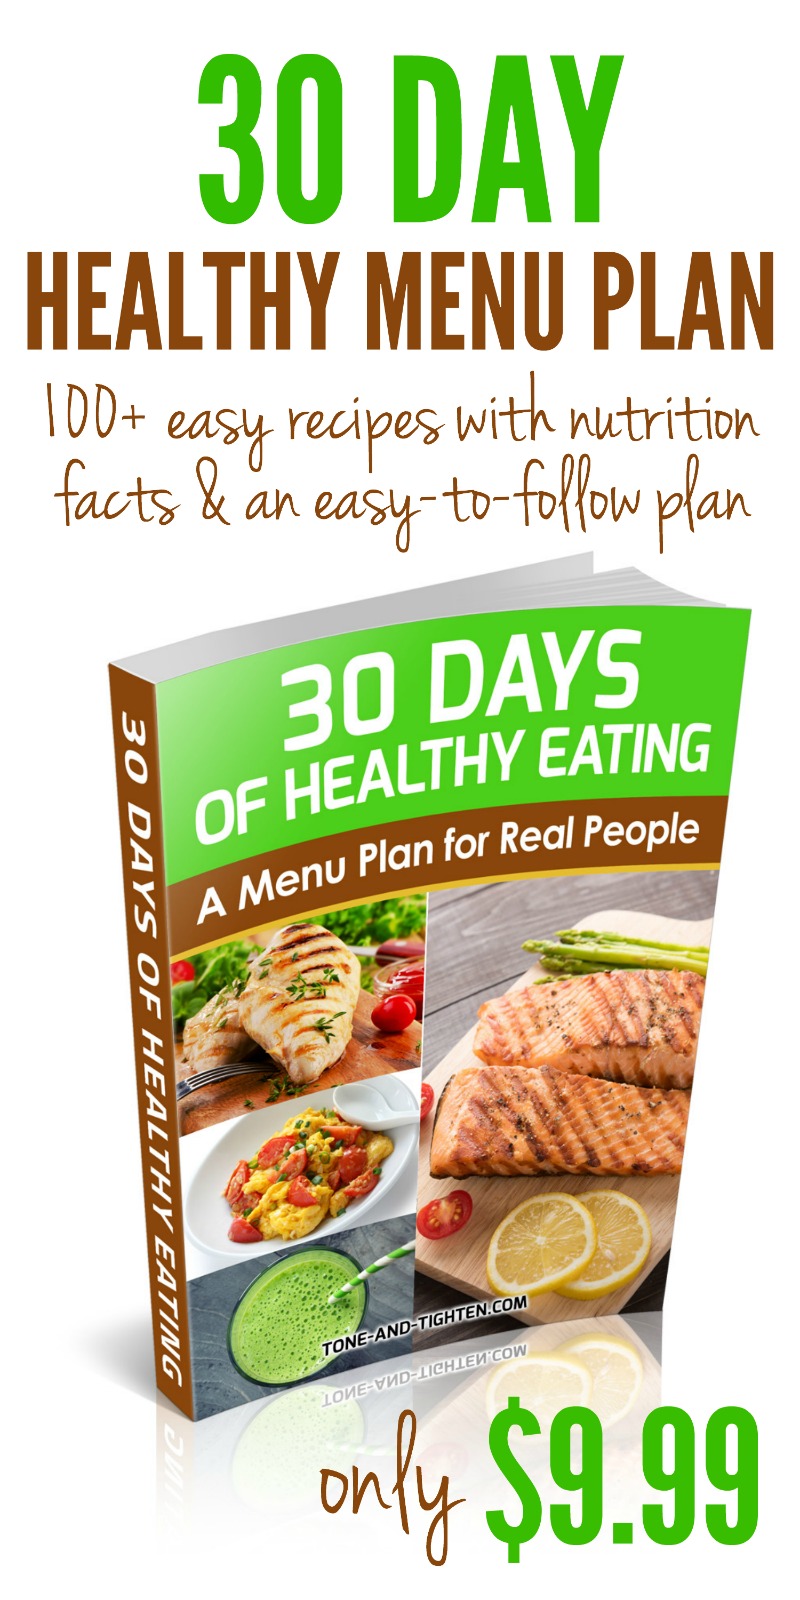 30 Days of Healthy Eating ebook